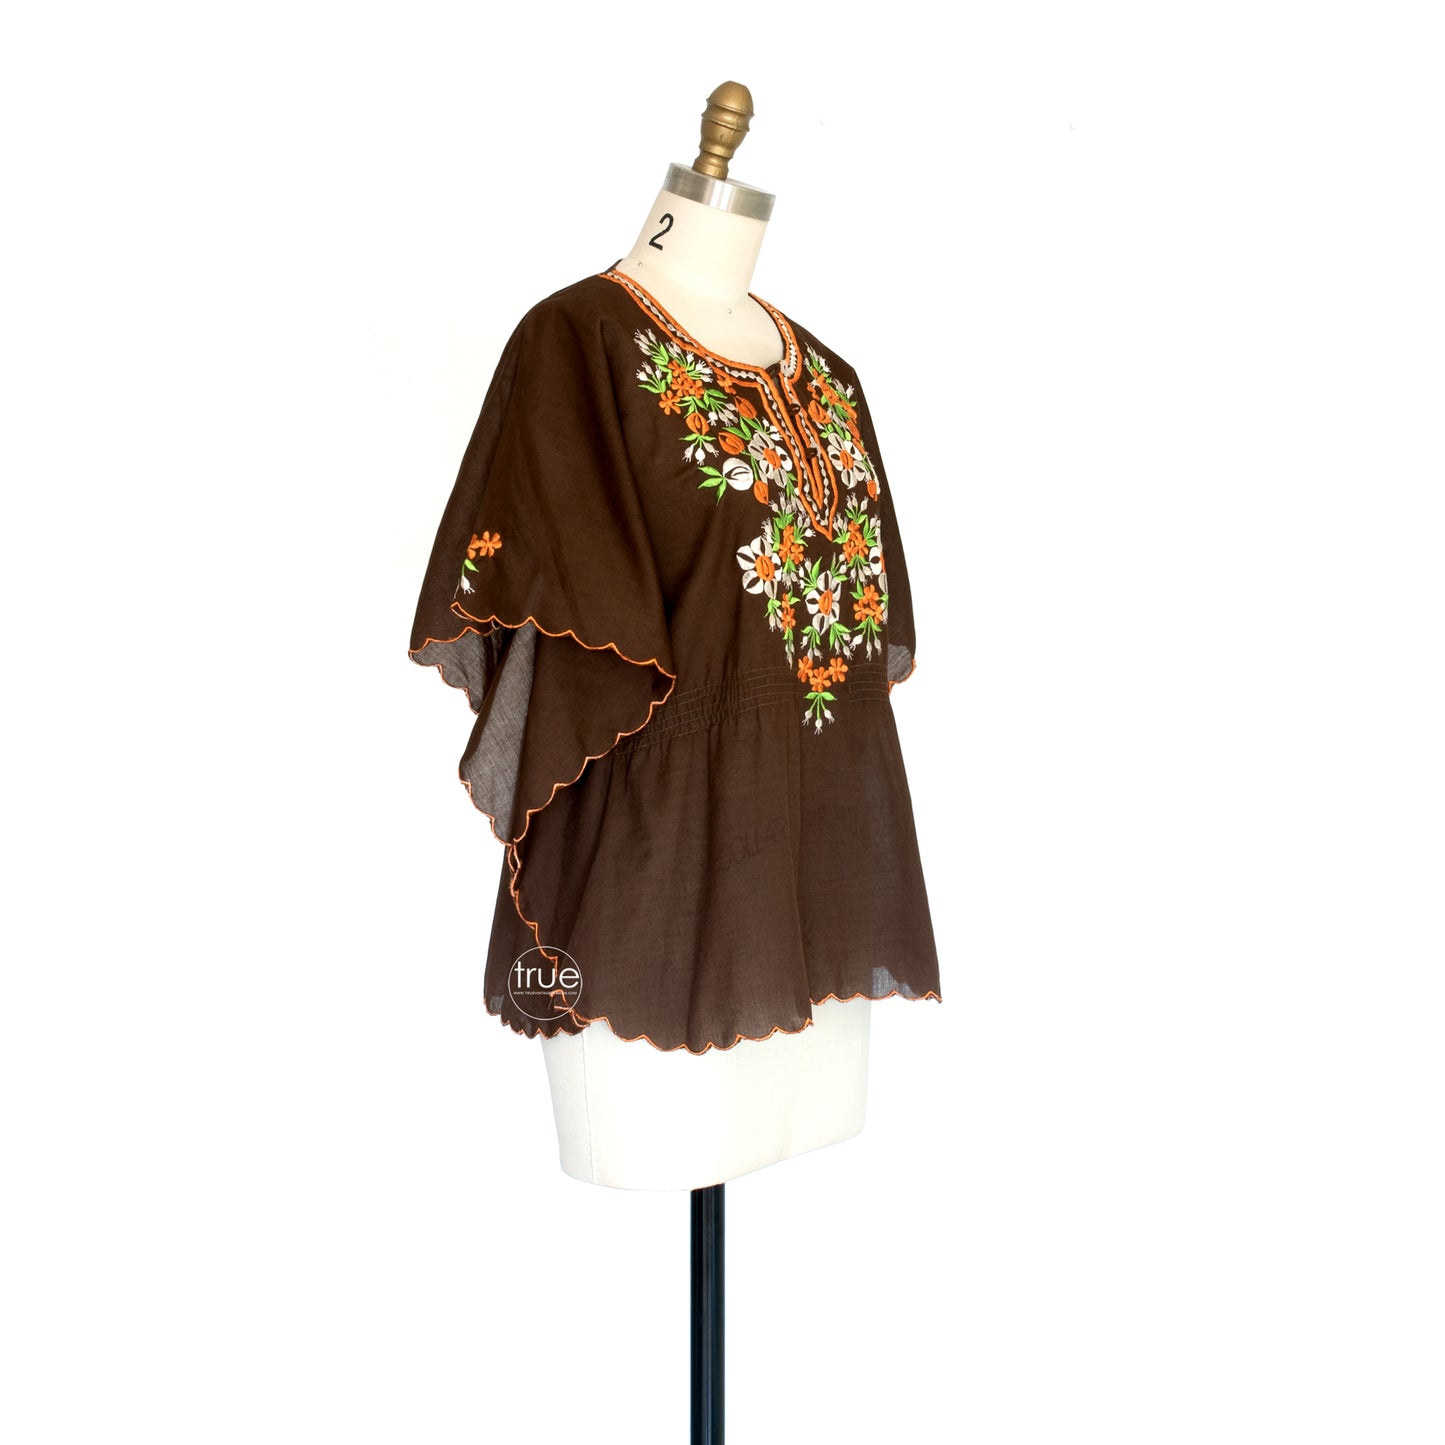 vintage 1970's top ...chocolate floral embroidered poncho top